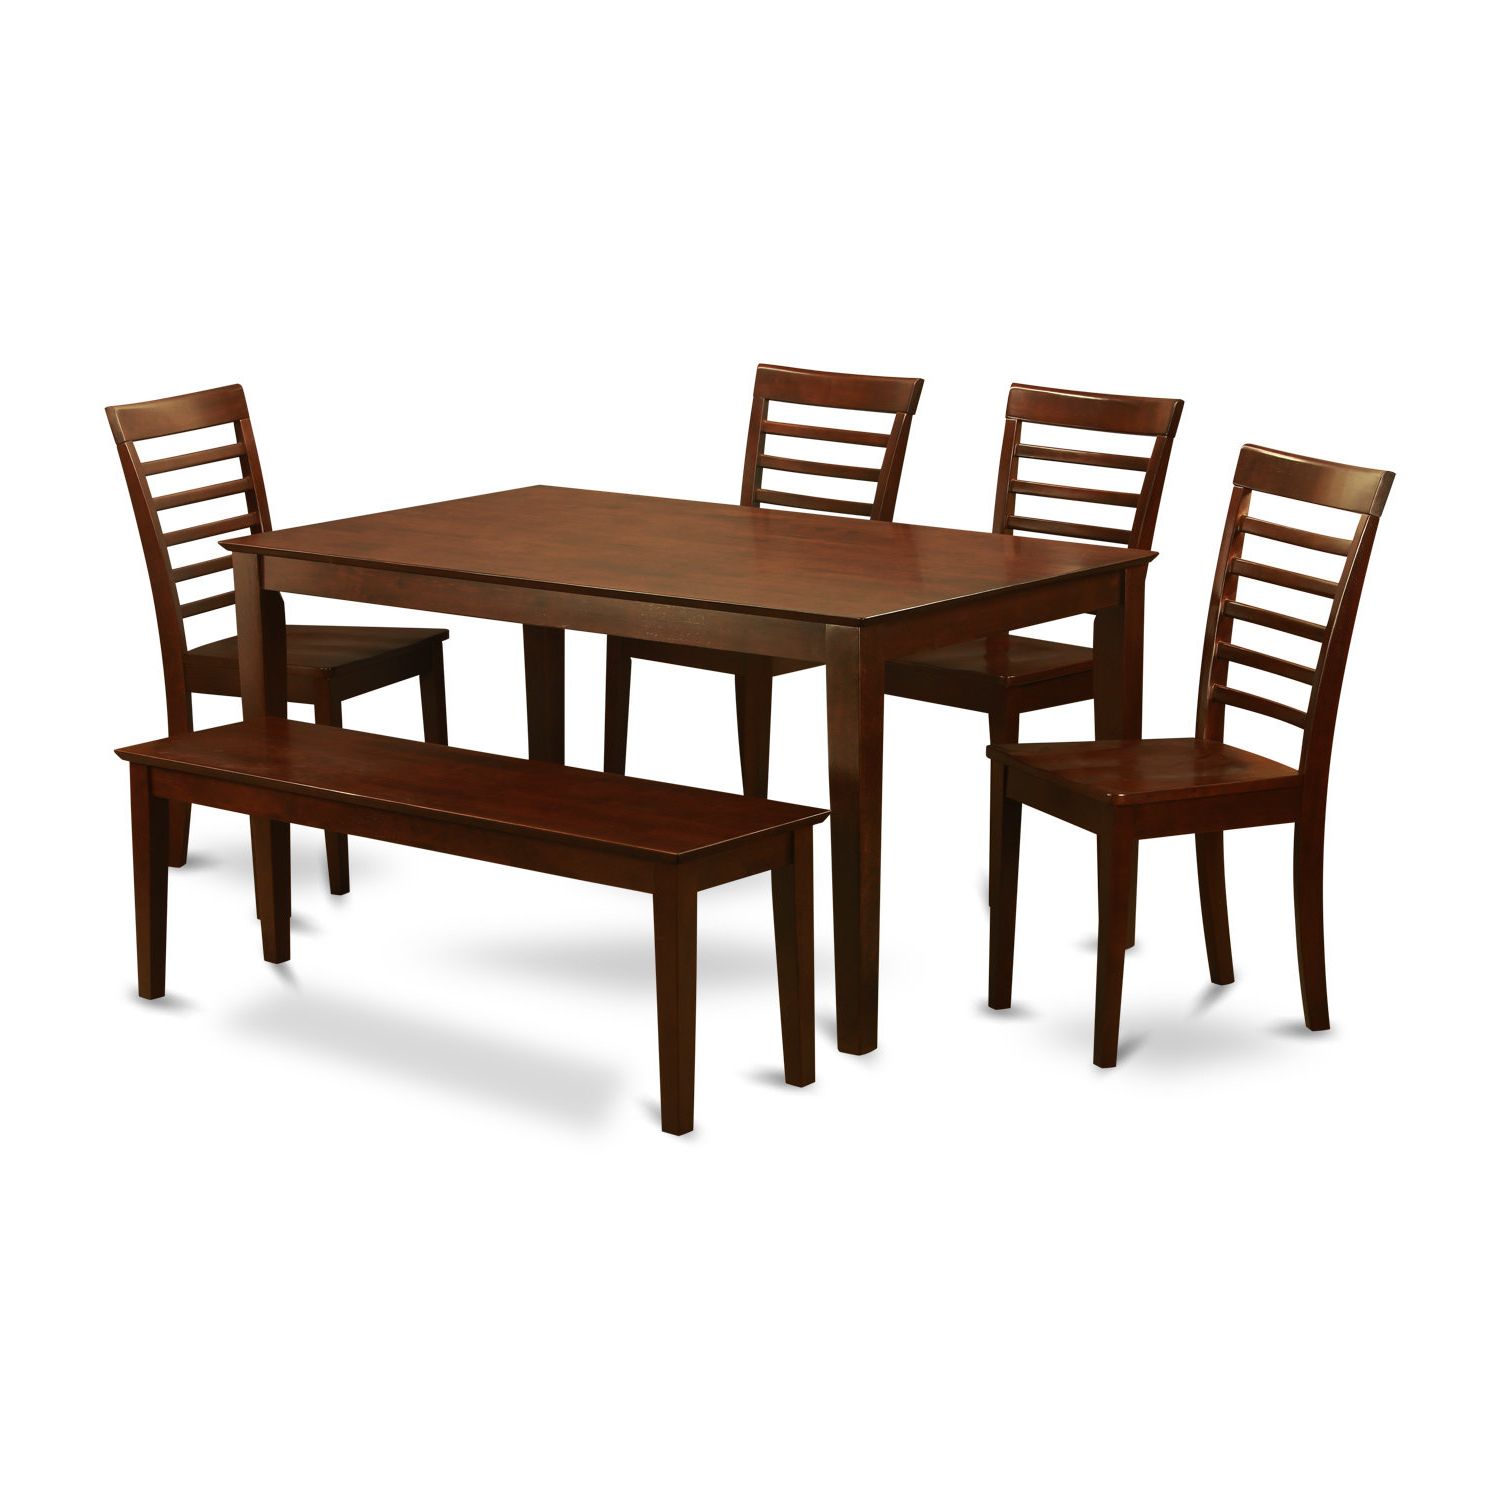 Current Details About Charlton Home Smyrna 6 Piece Dining Set Chlh5013 Regarding Smyrna 3 Piece Dining Sets (View 9 of 20)